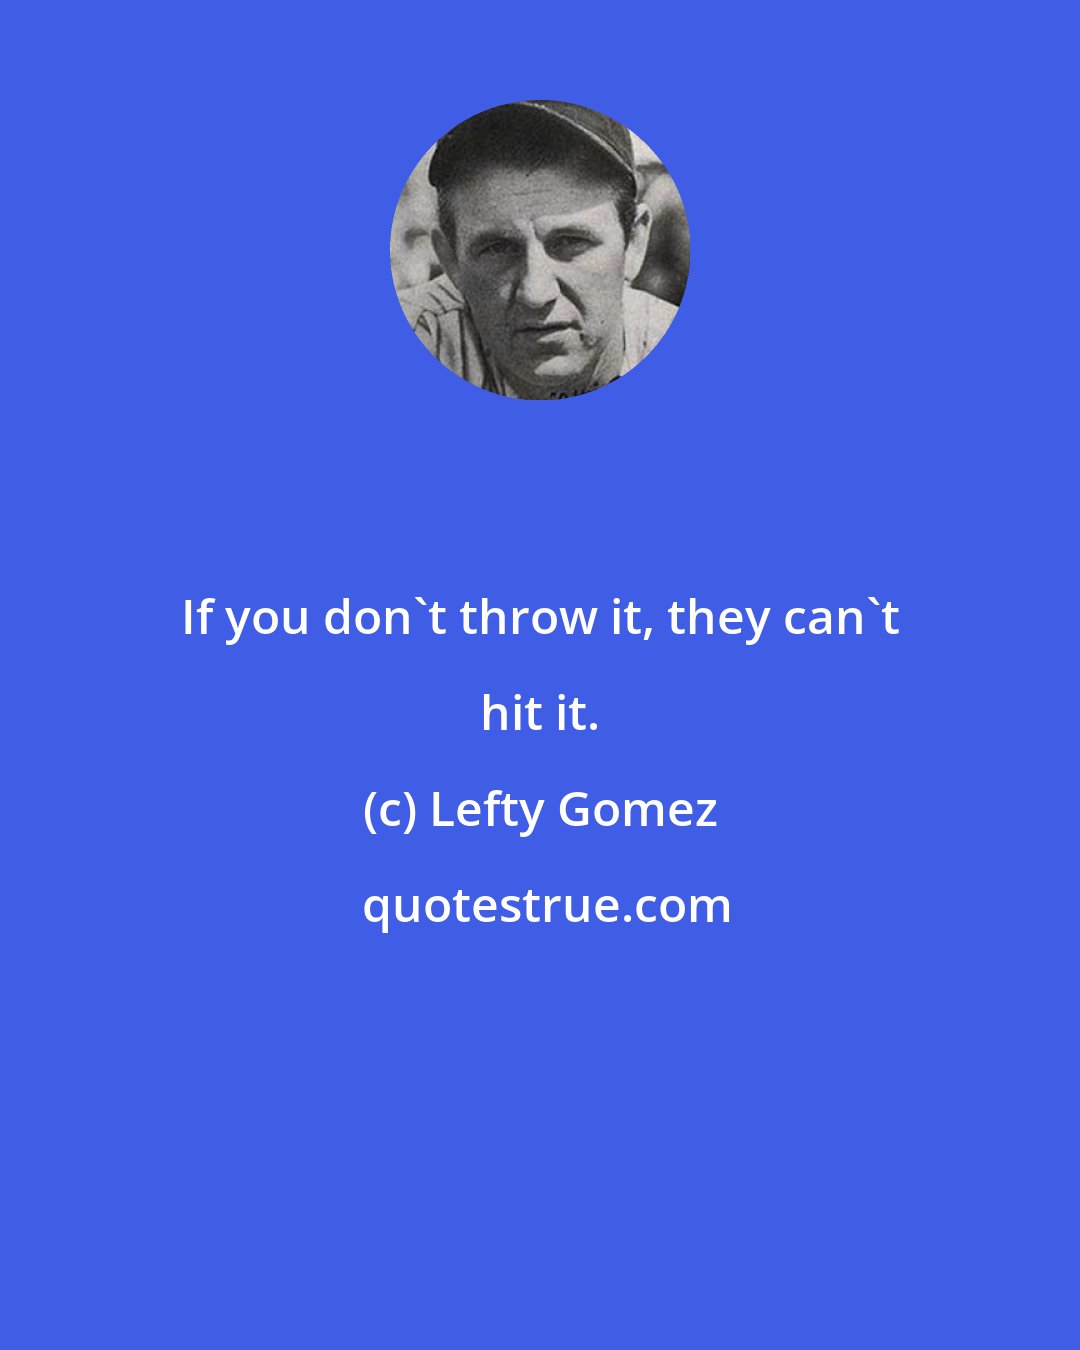 Lefty Gomez: If you don't throw it, they can't hit it.